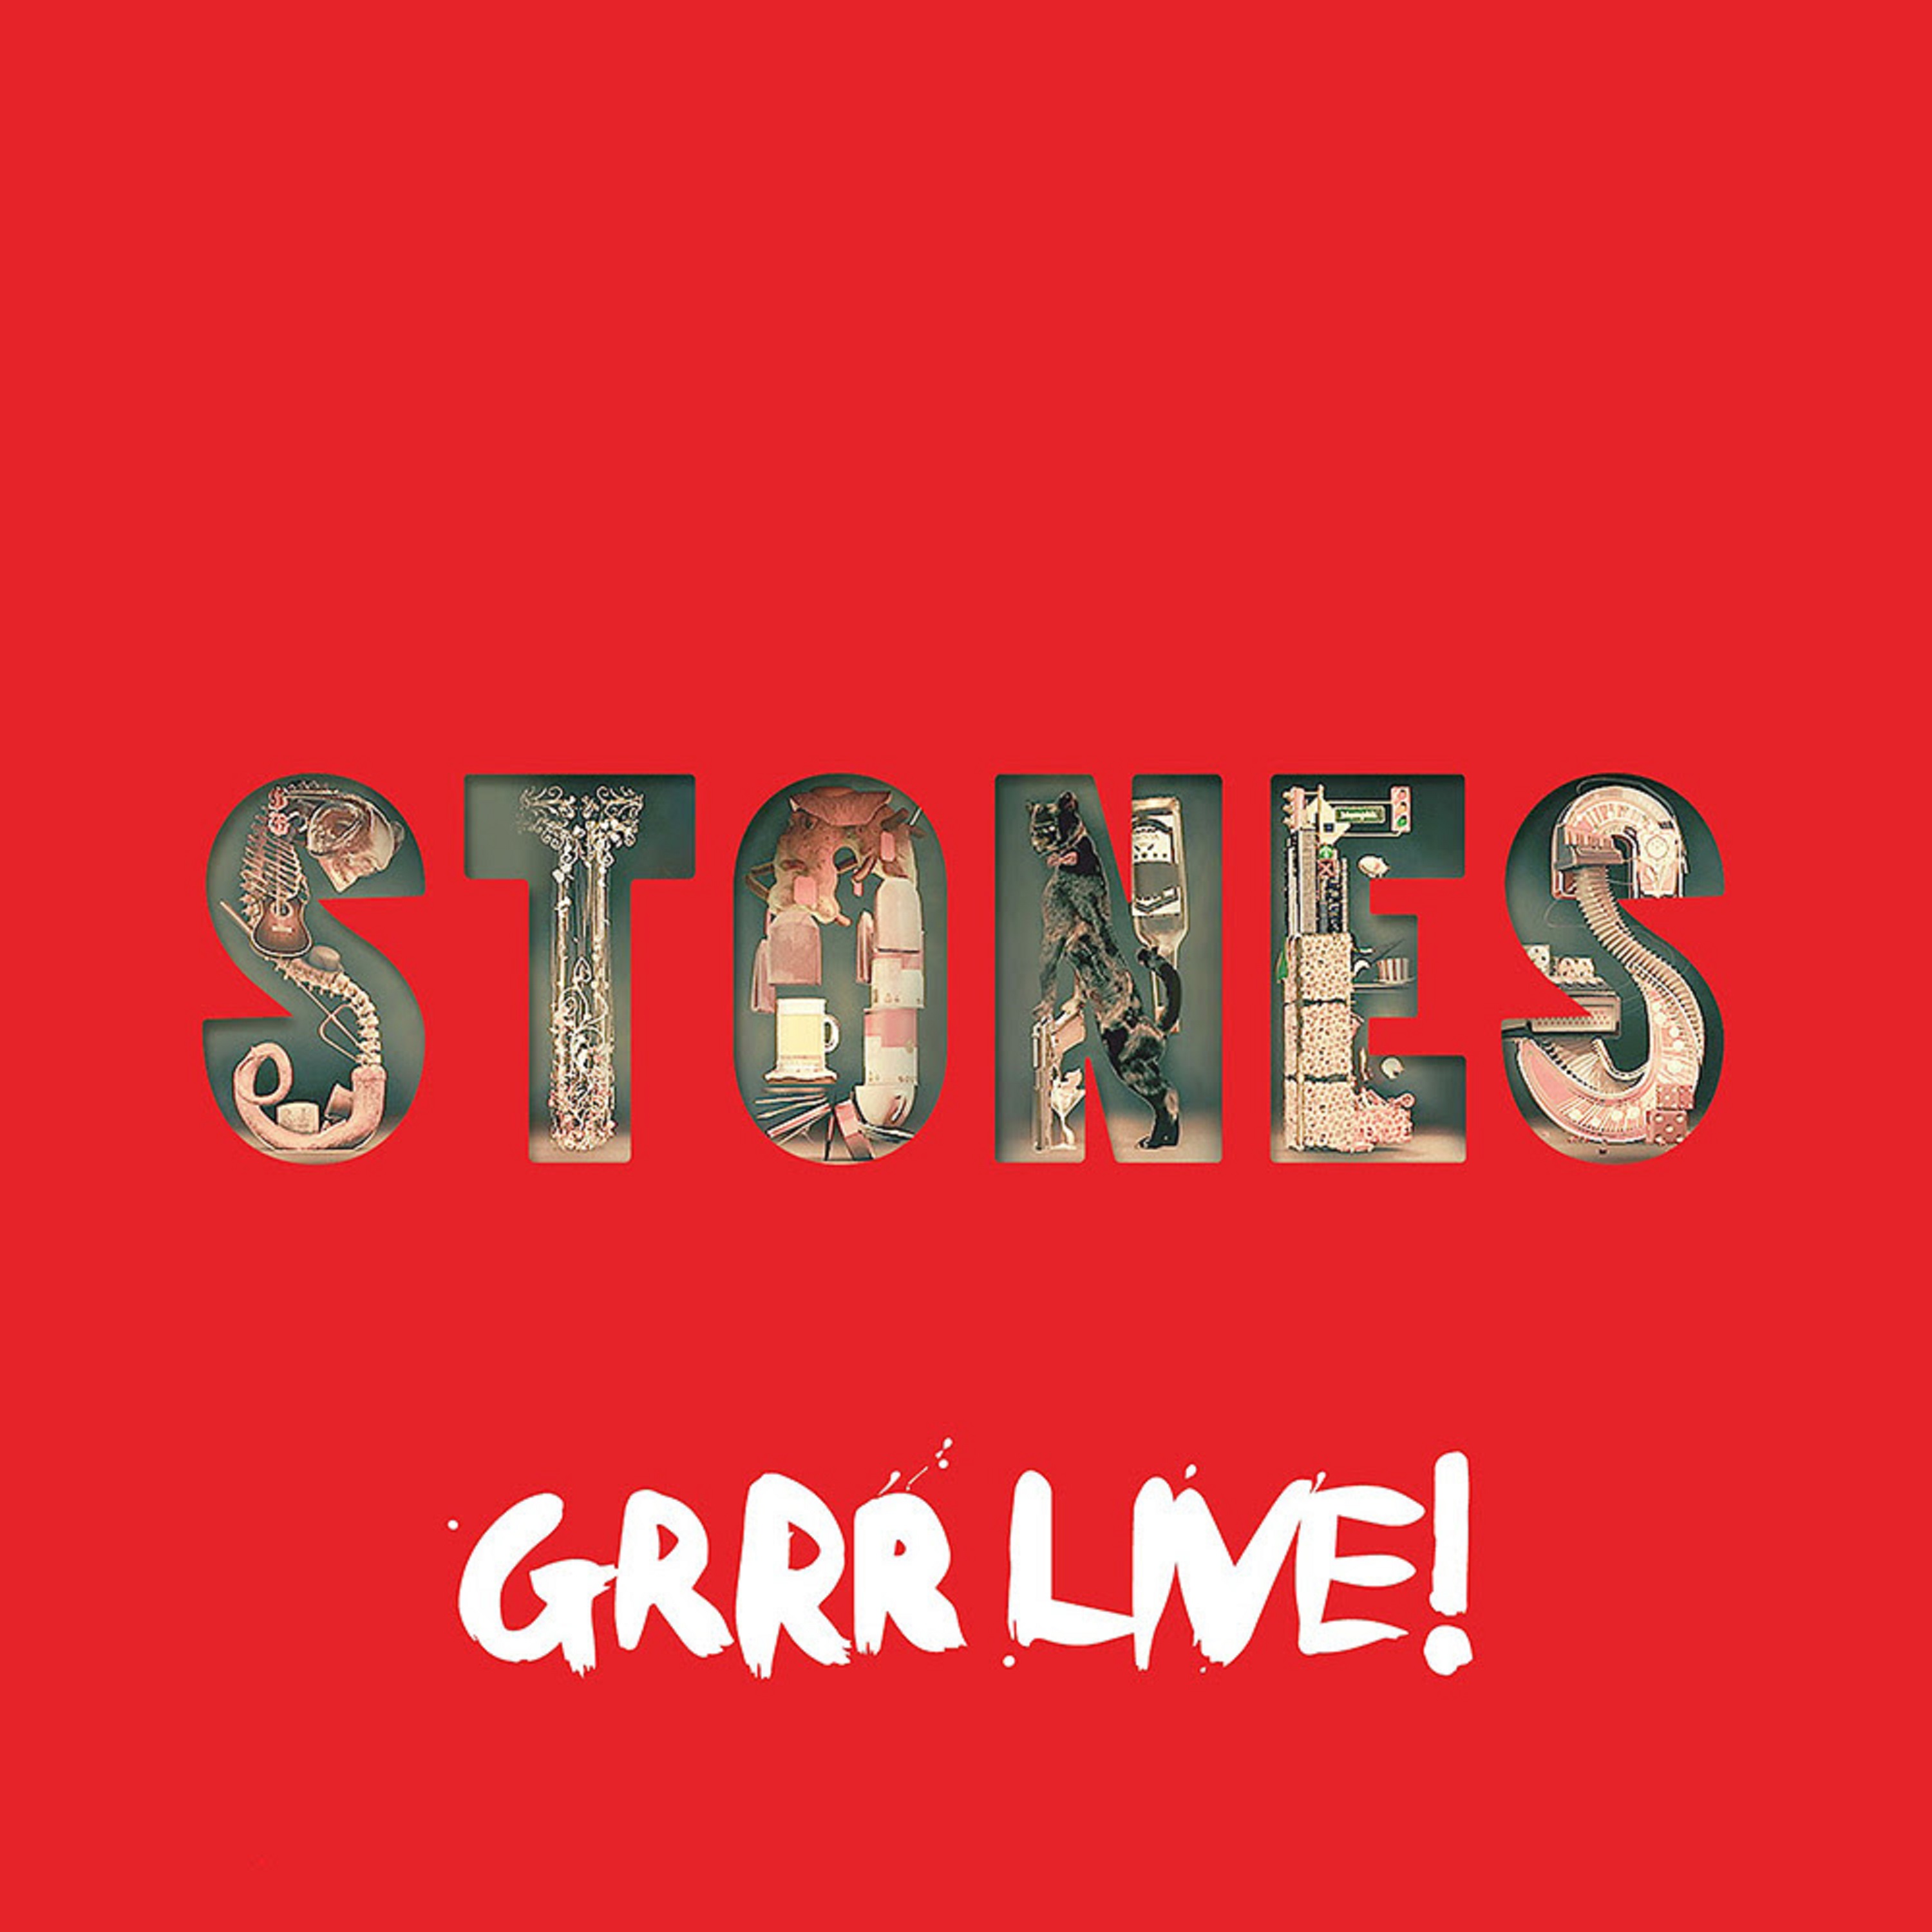 ROLLING STONES ANNOUNCE THE RELEASE OF THE DEFINITIVE LIVE BEST OF, ‘GRRR LIVE!’